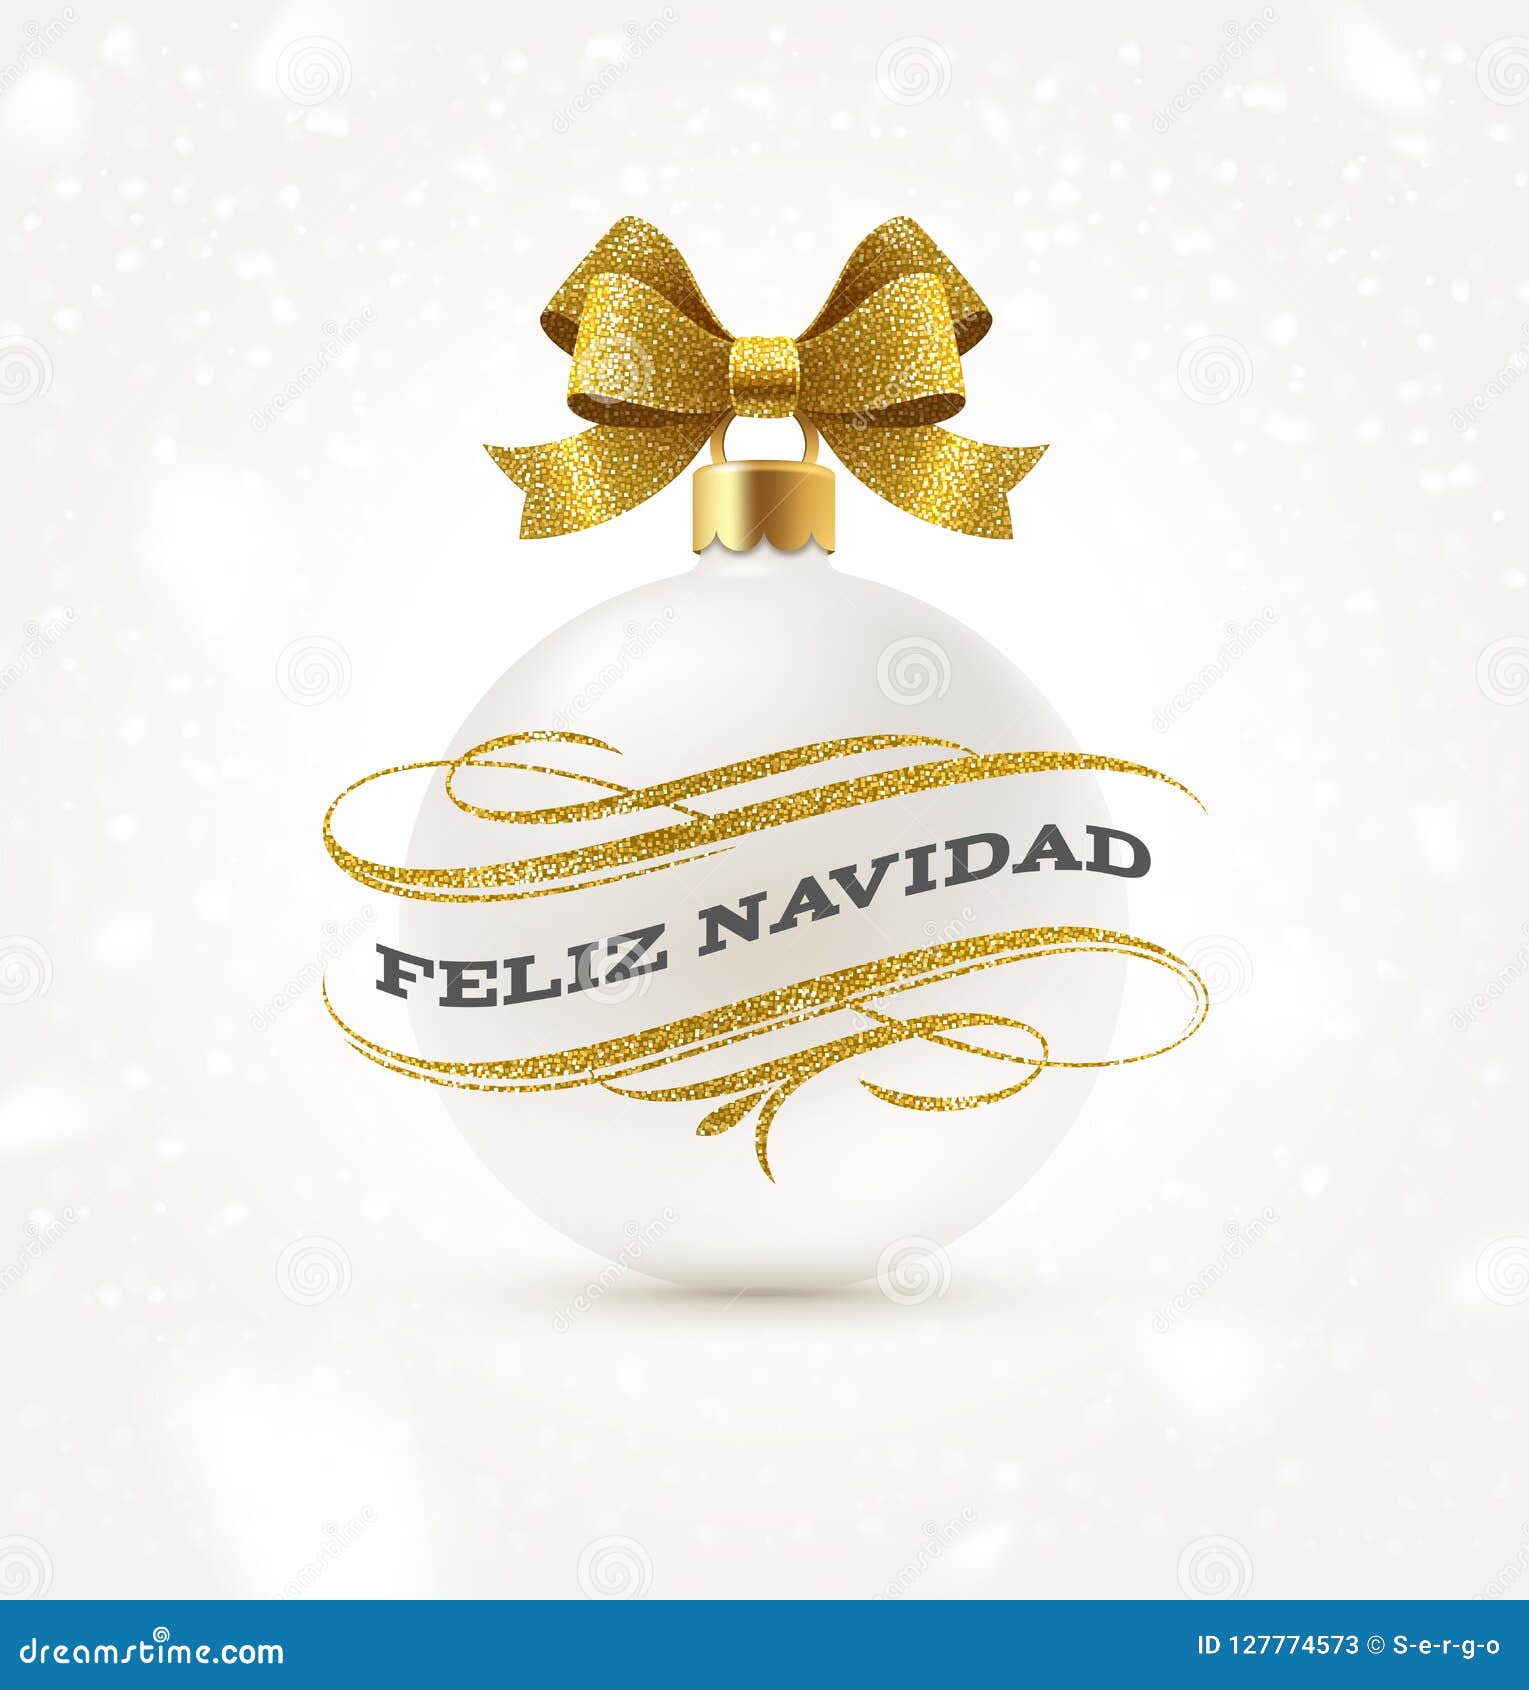 feliz navidad - christmas greetings in spanish with glitter gold flourishes s and white christmas bauble